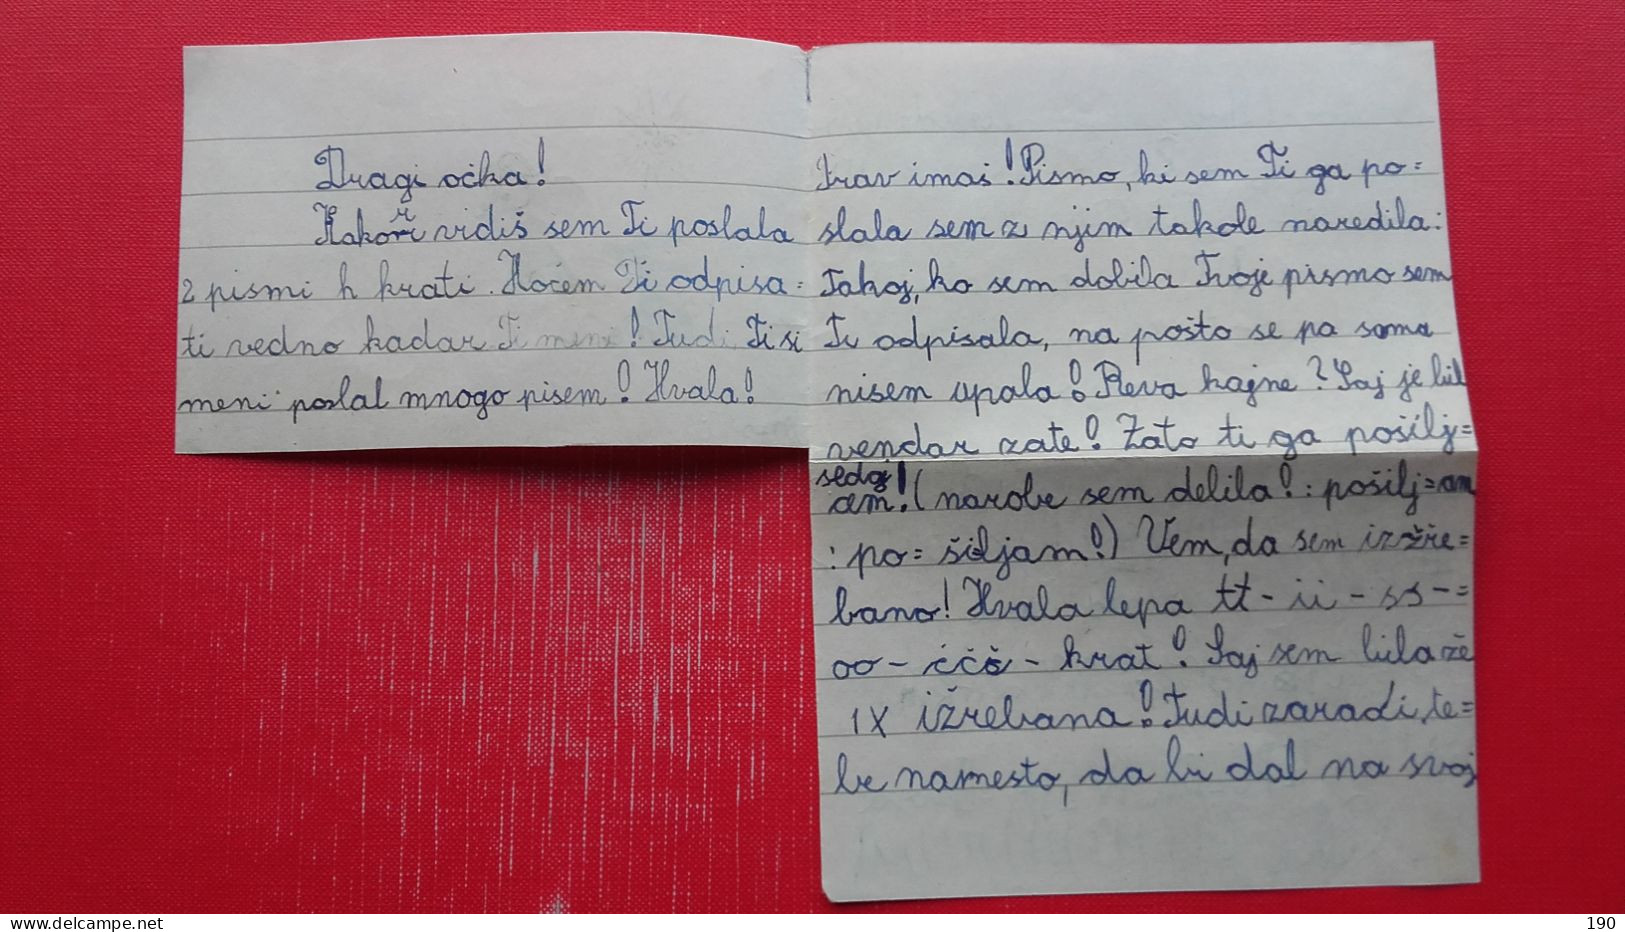 Letter Sent From Ljubljana To Golnik.Written By Child - Covers & Documents